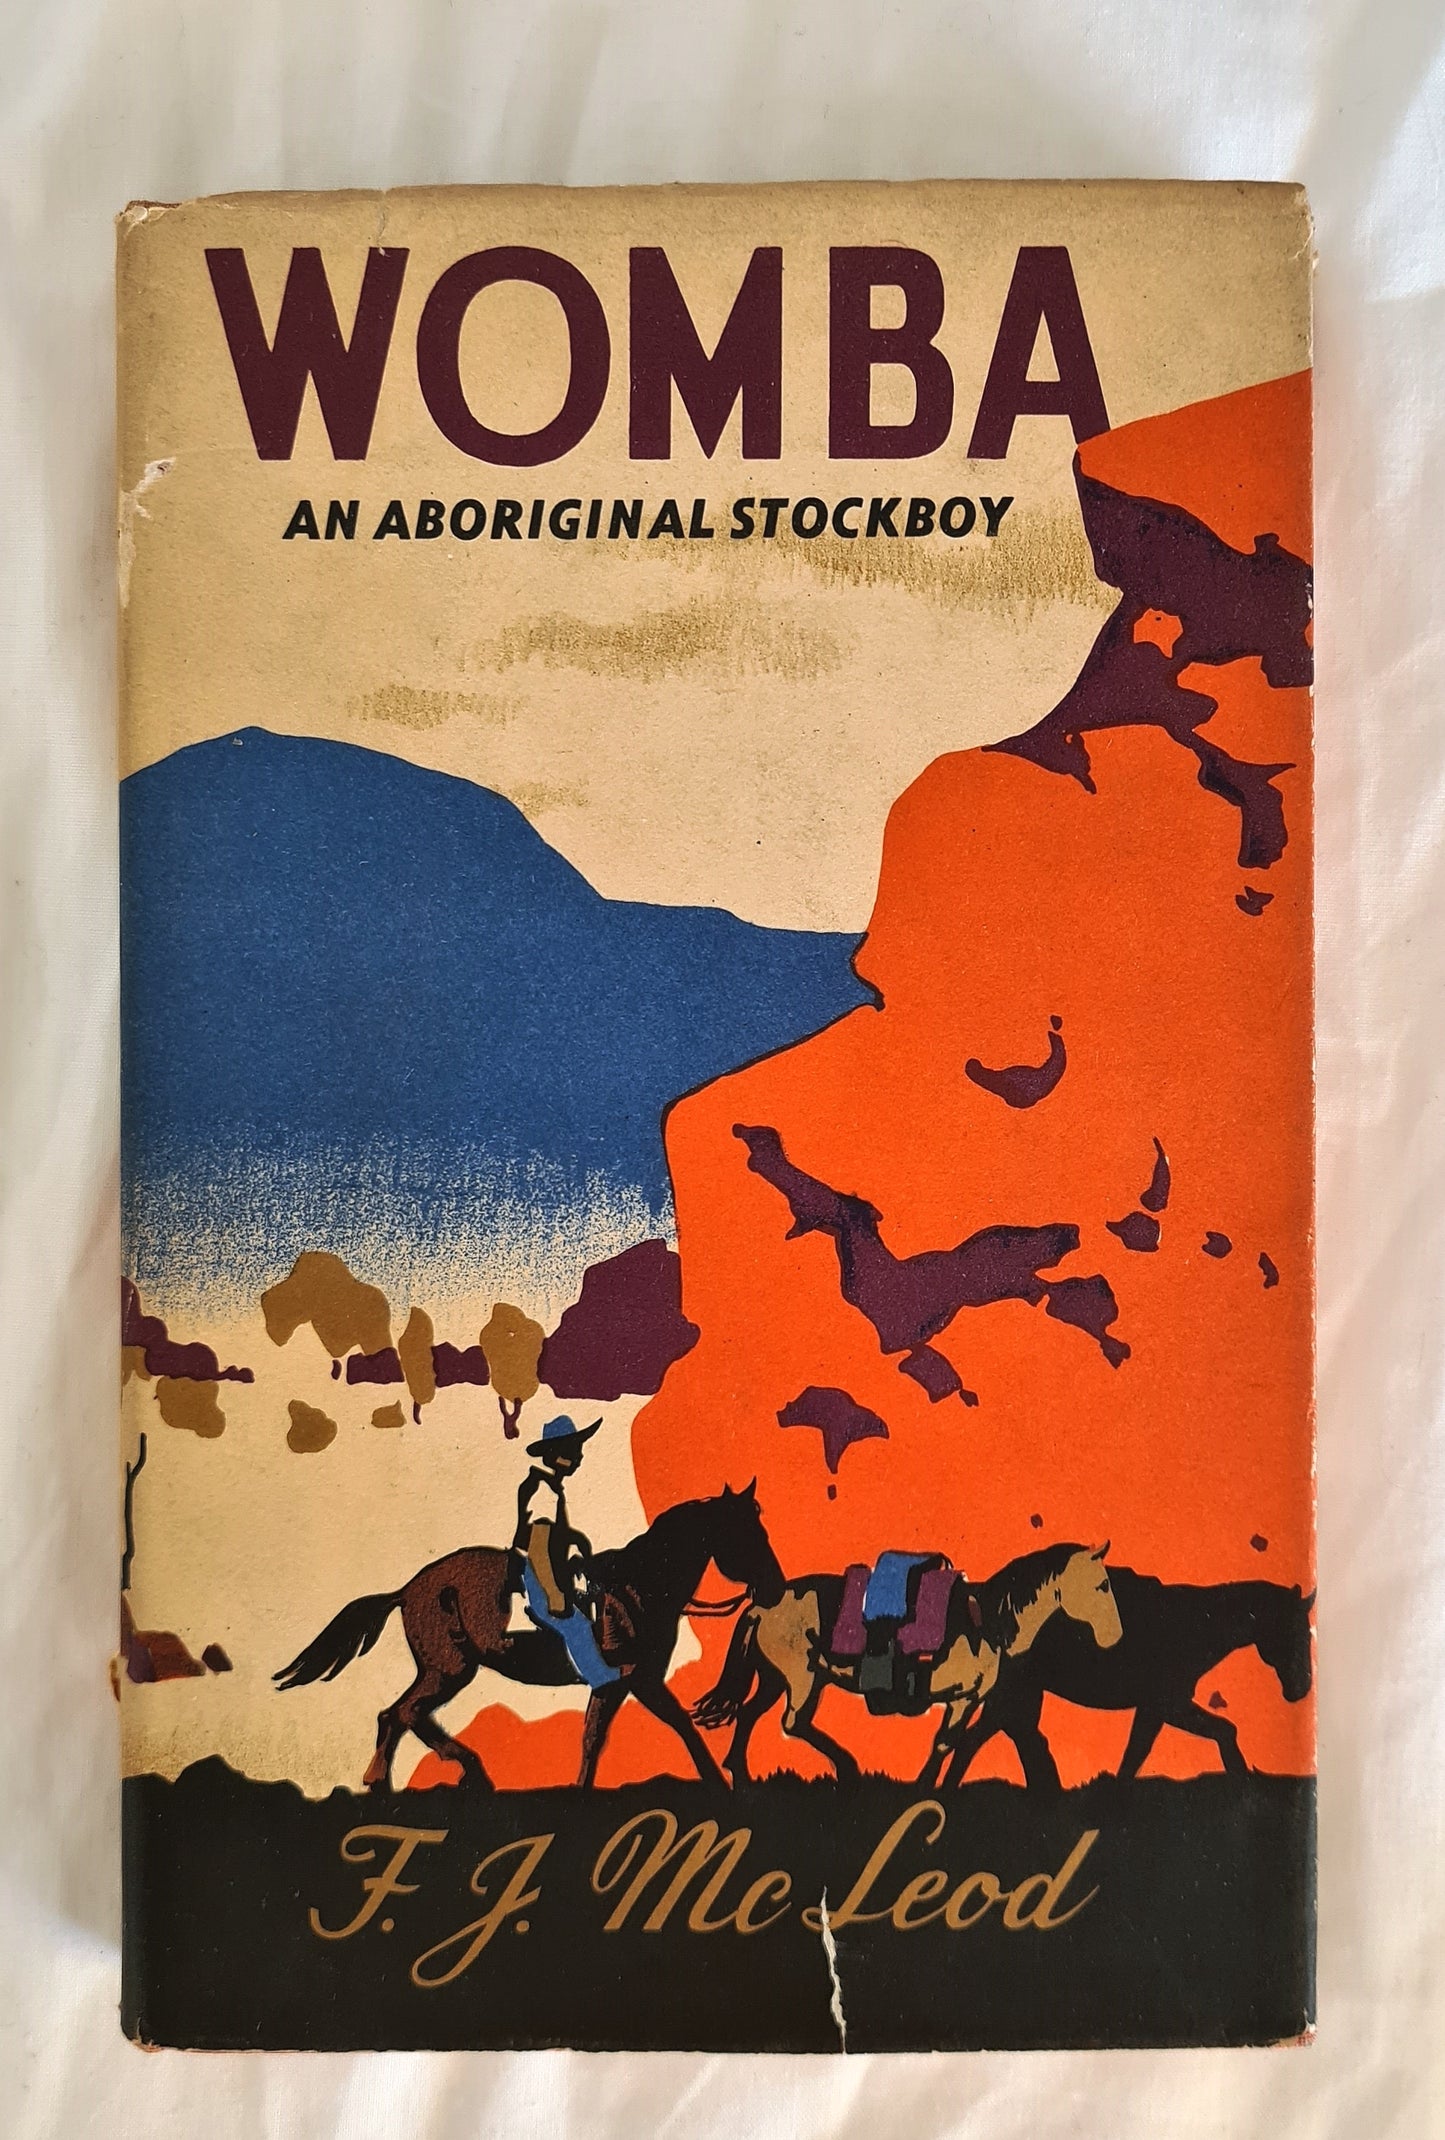 Womba  An Aboriginal Stockboy in the Cattle Country in the Heart of Australia  by F. J. McLeod